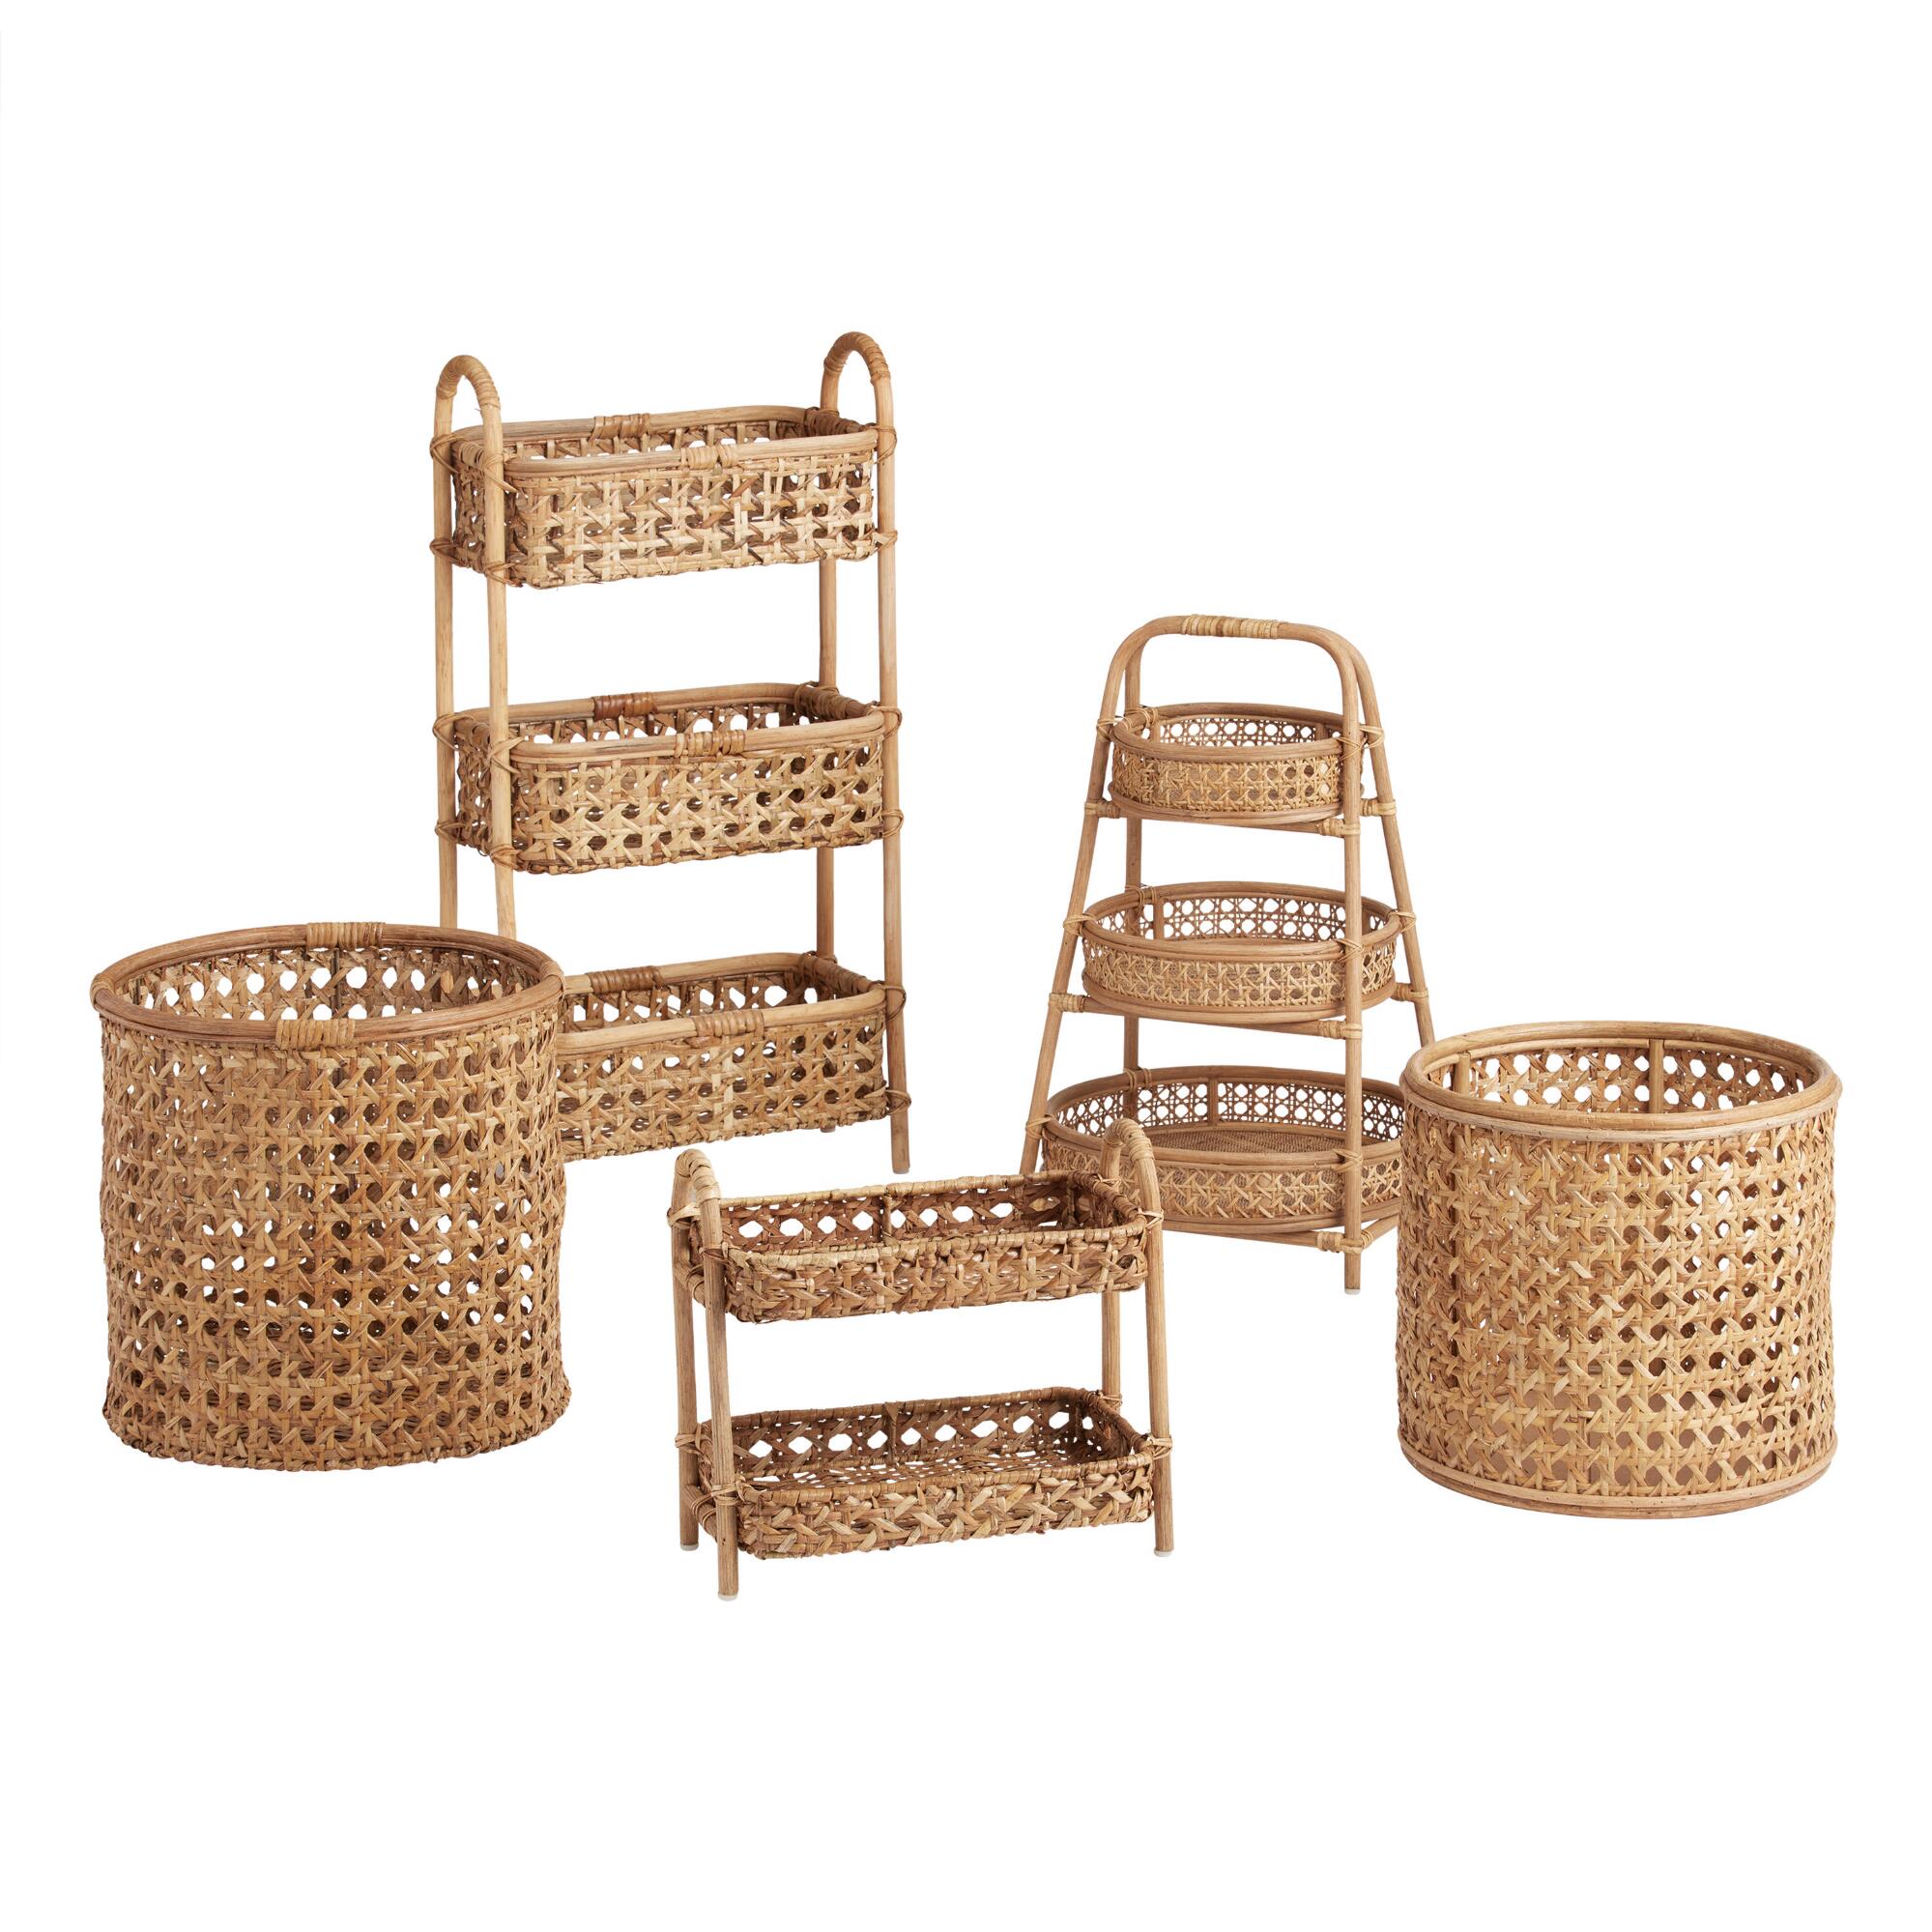 Natural Rattan Cane Farrah Storage Collection by World Market